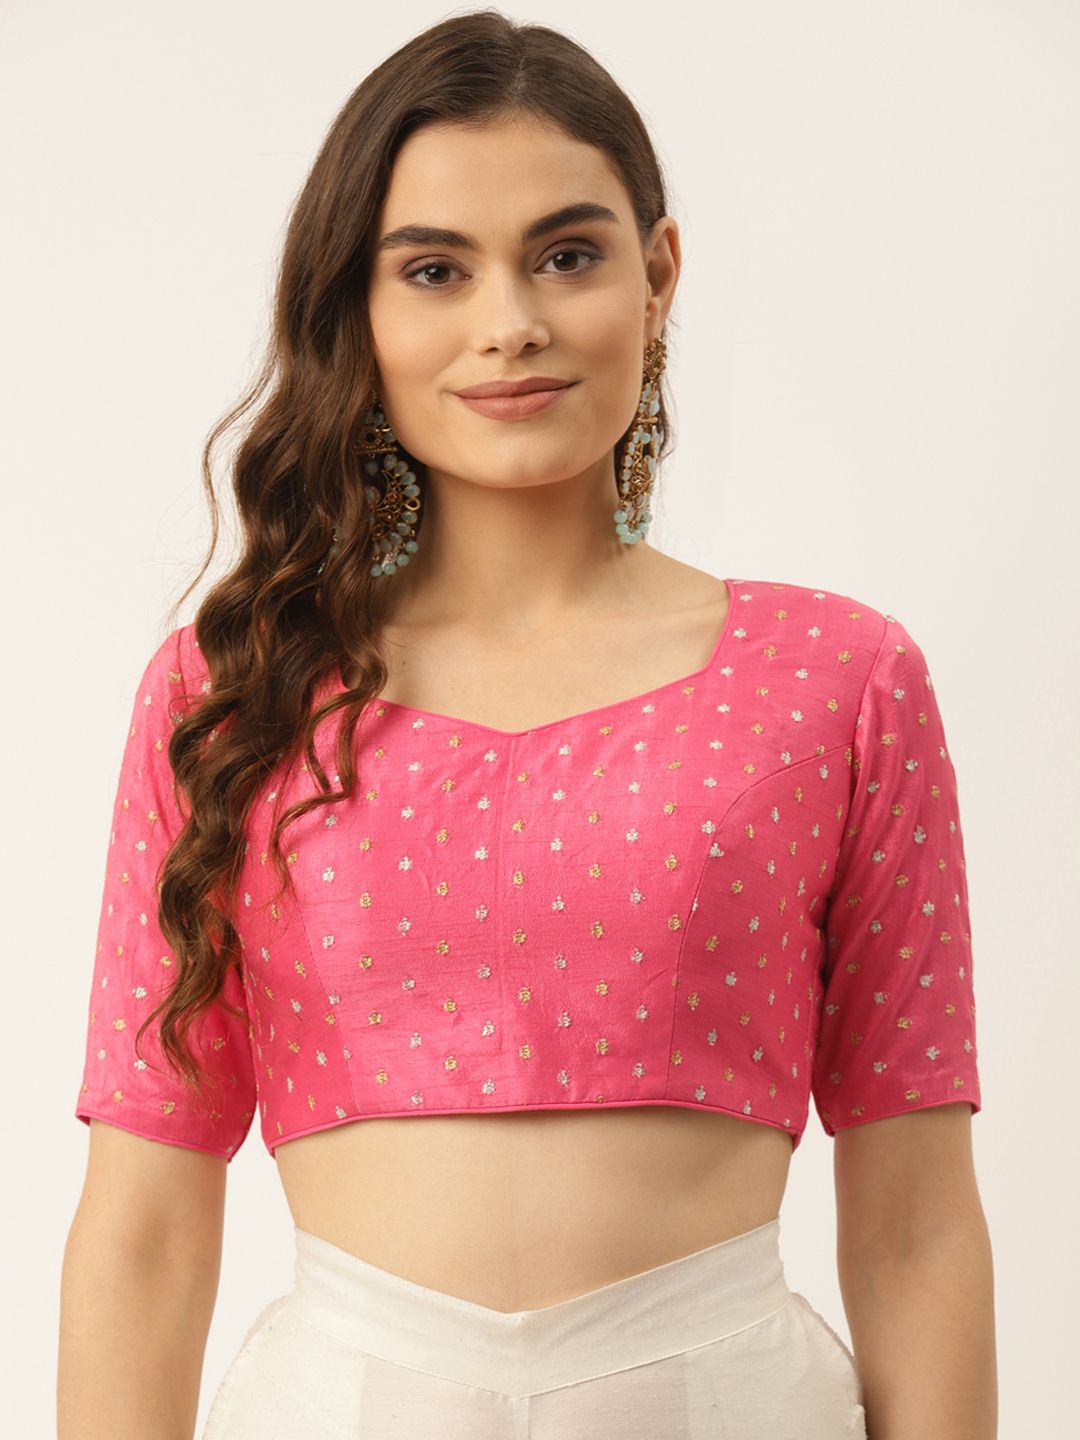 NDS Niharikaa Designer Studio Women Pink Embroidered Padded Blouse Price in India